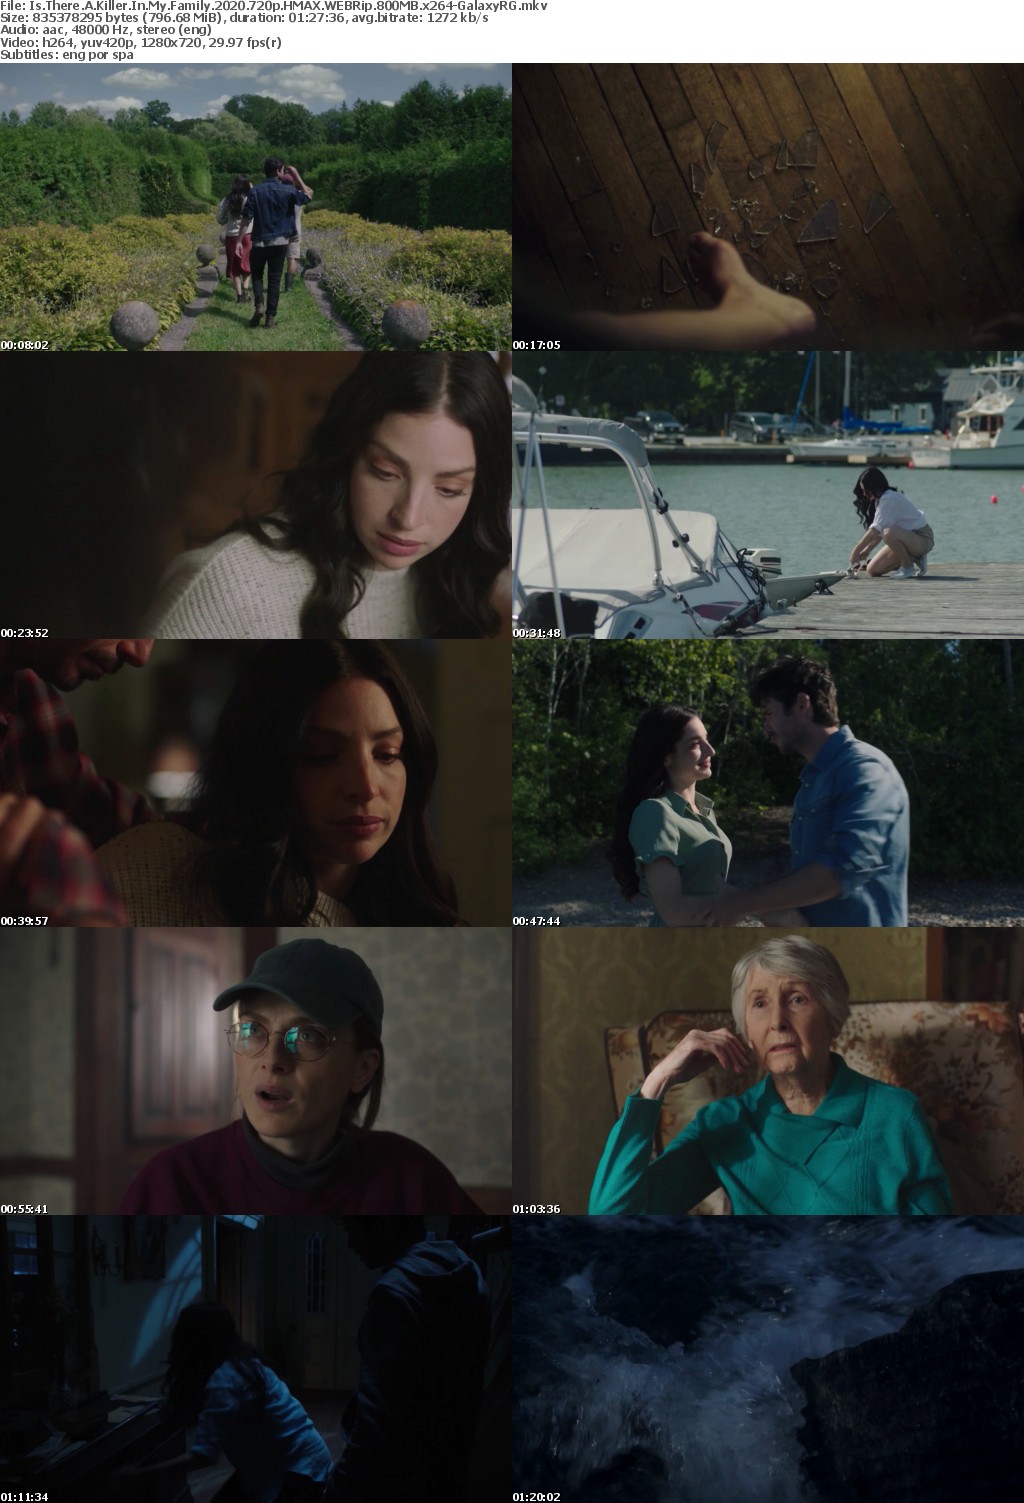 Is There A Killer In My Family 2020 720p HMAX WEBRip 800MB x264-GalaxyRG